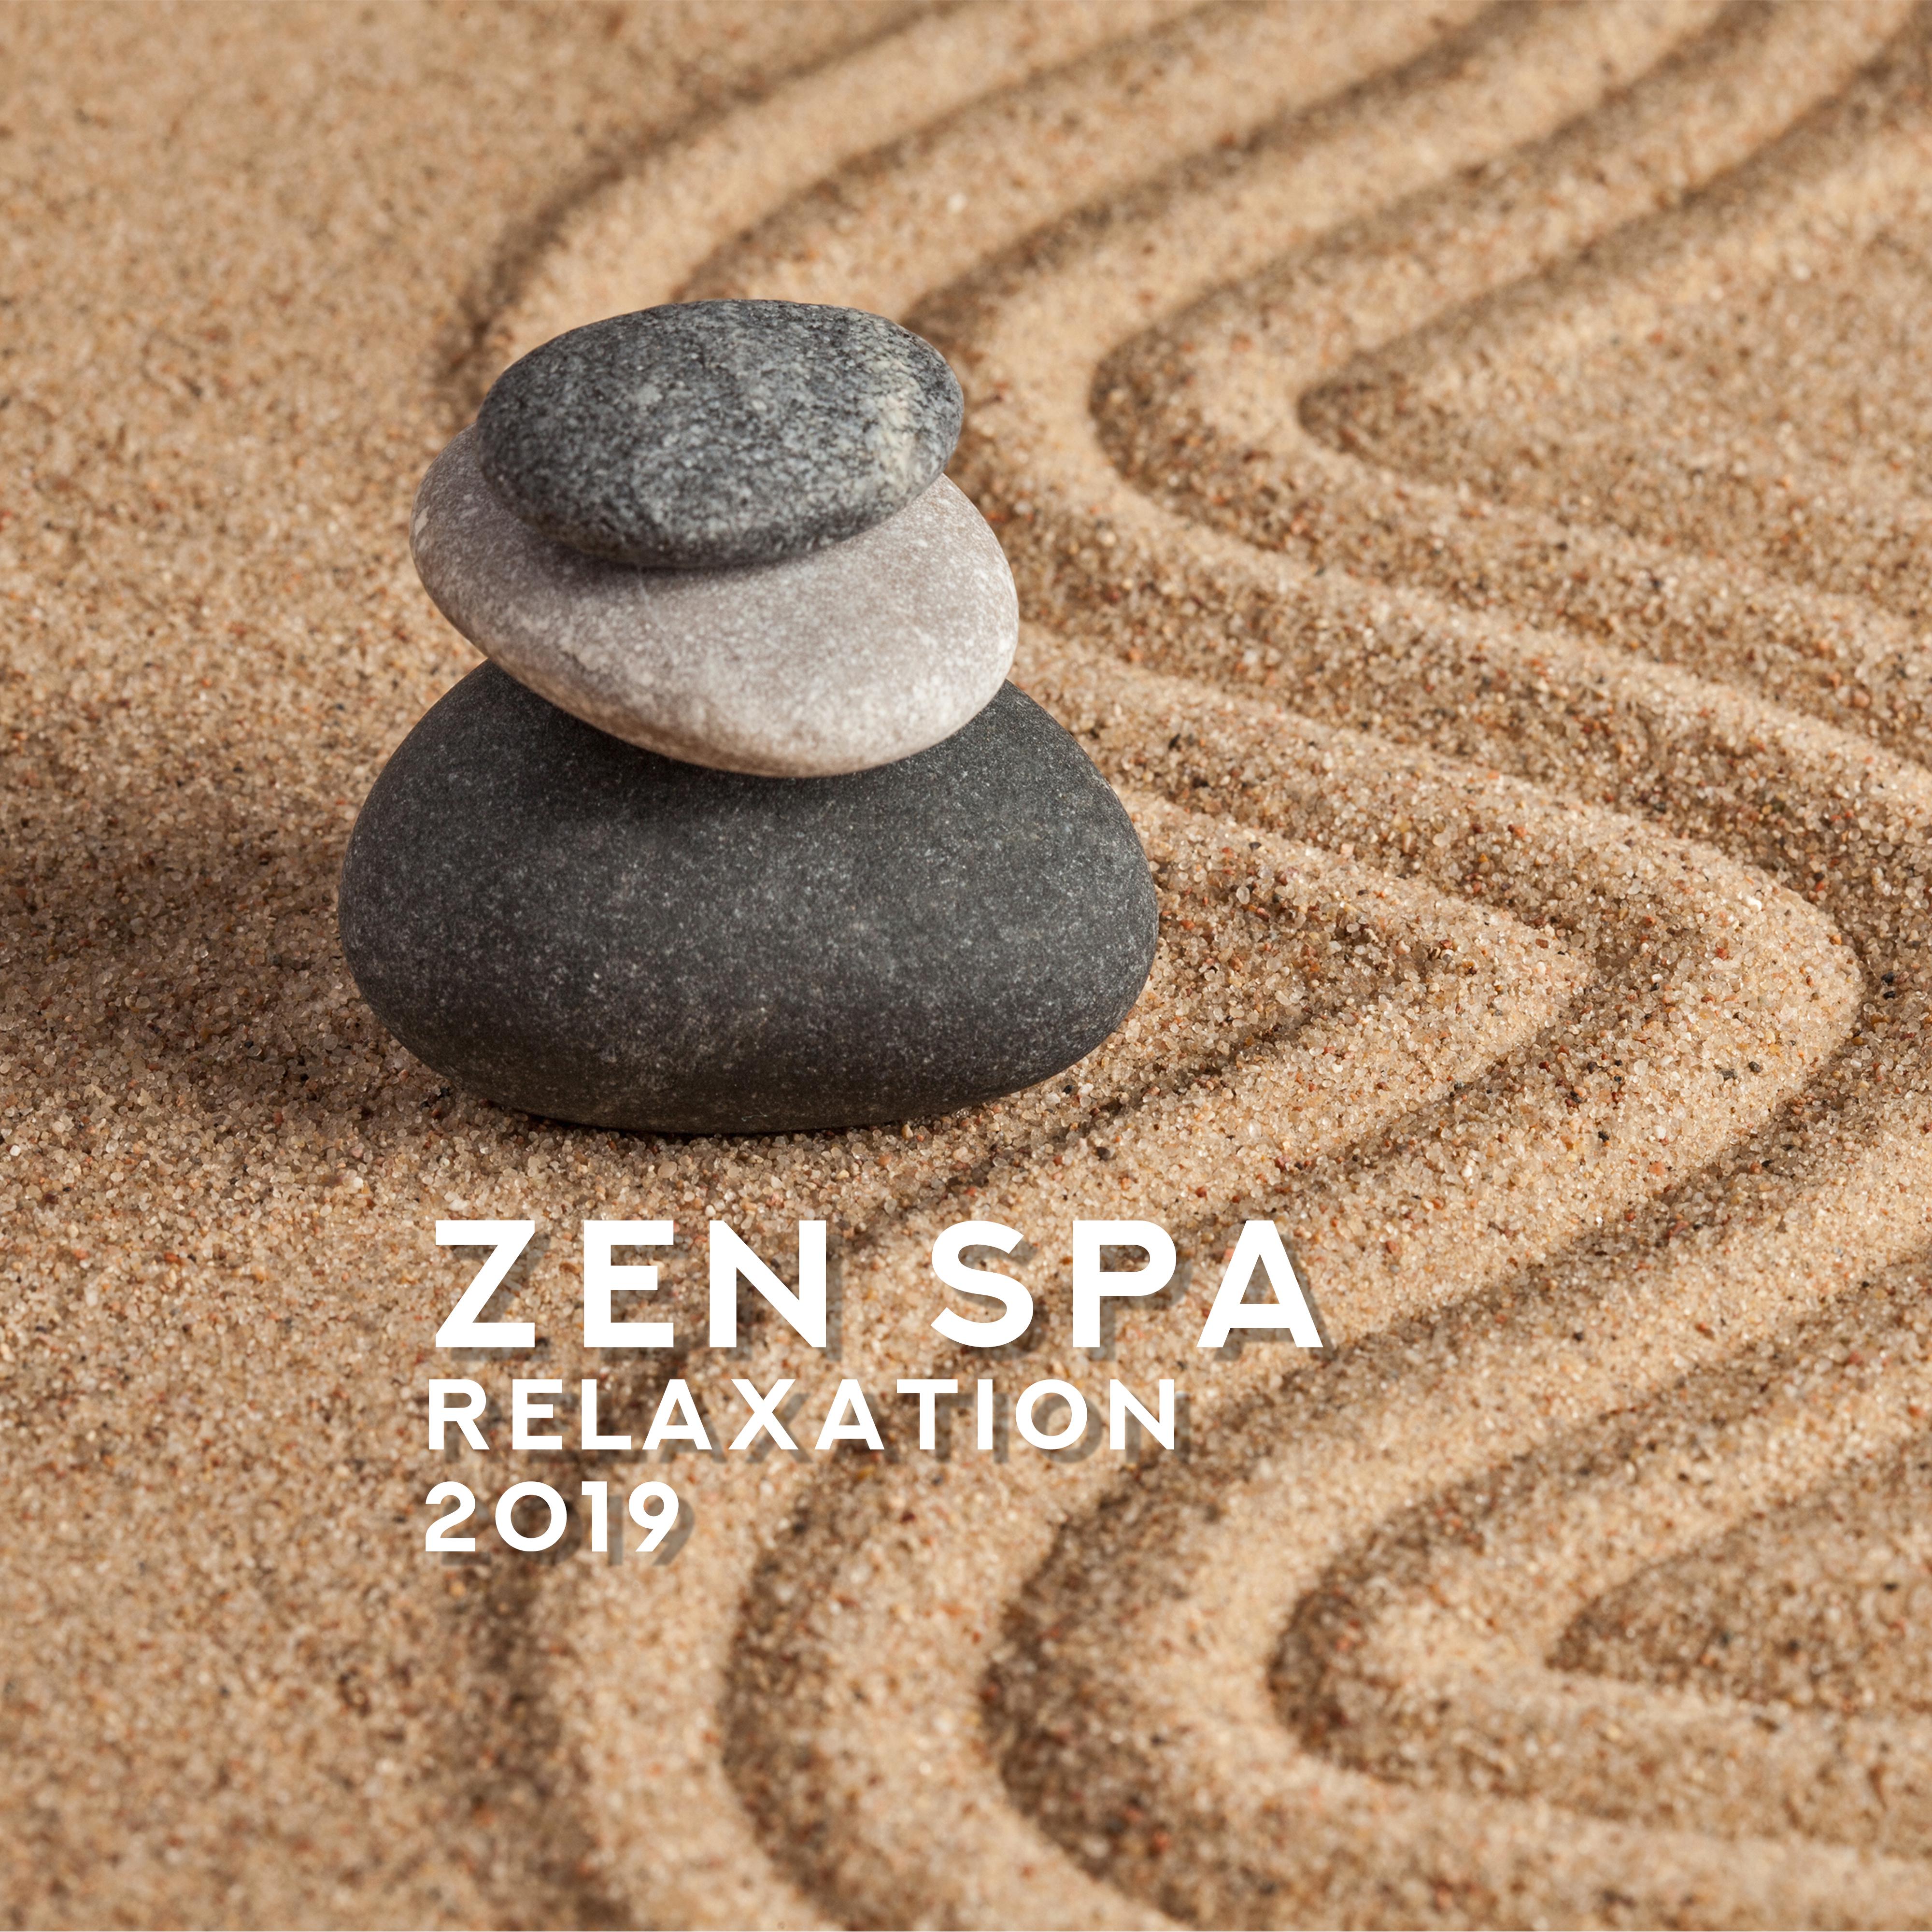 Zen Spa Relaxation 2019 – Nature Sounds for Spa, Wellness, Pure Mind, Smooth Massage Music, Pure Relaxation, Relax Zone